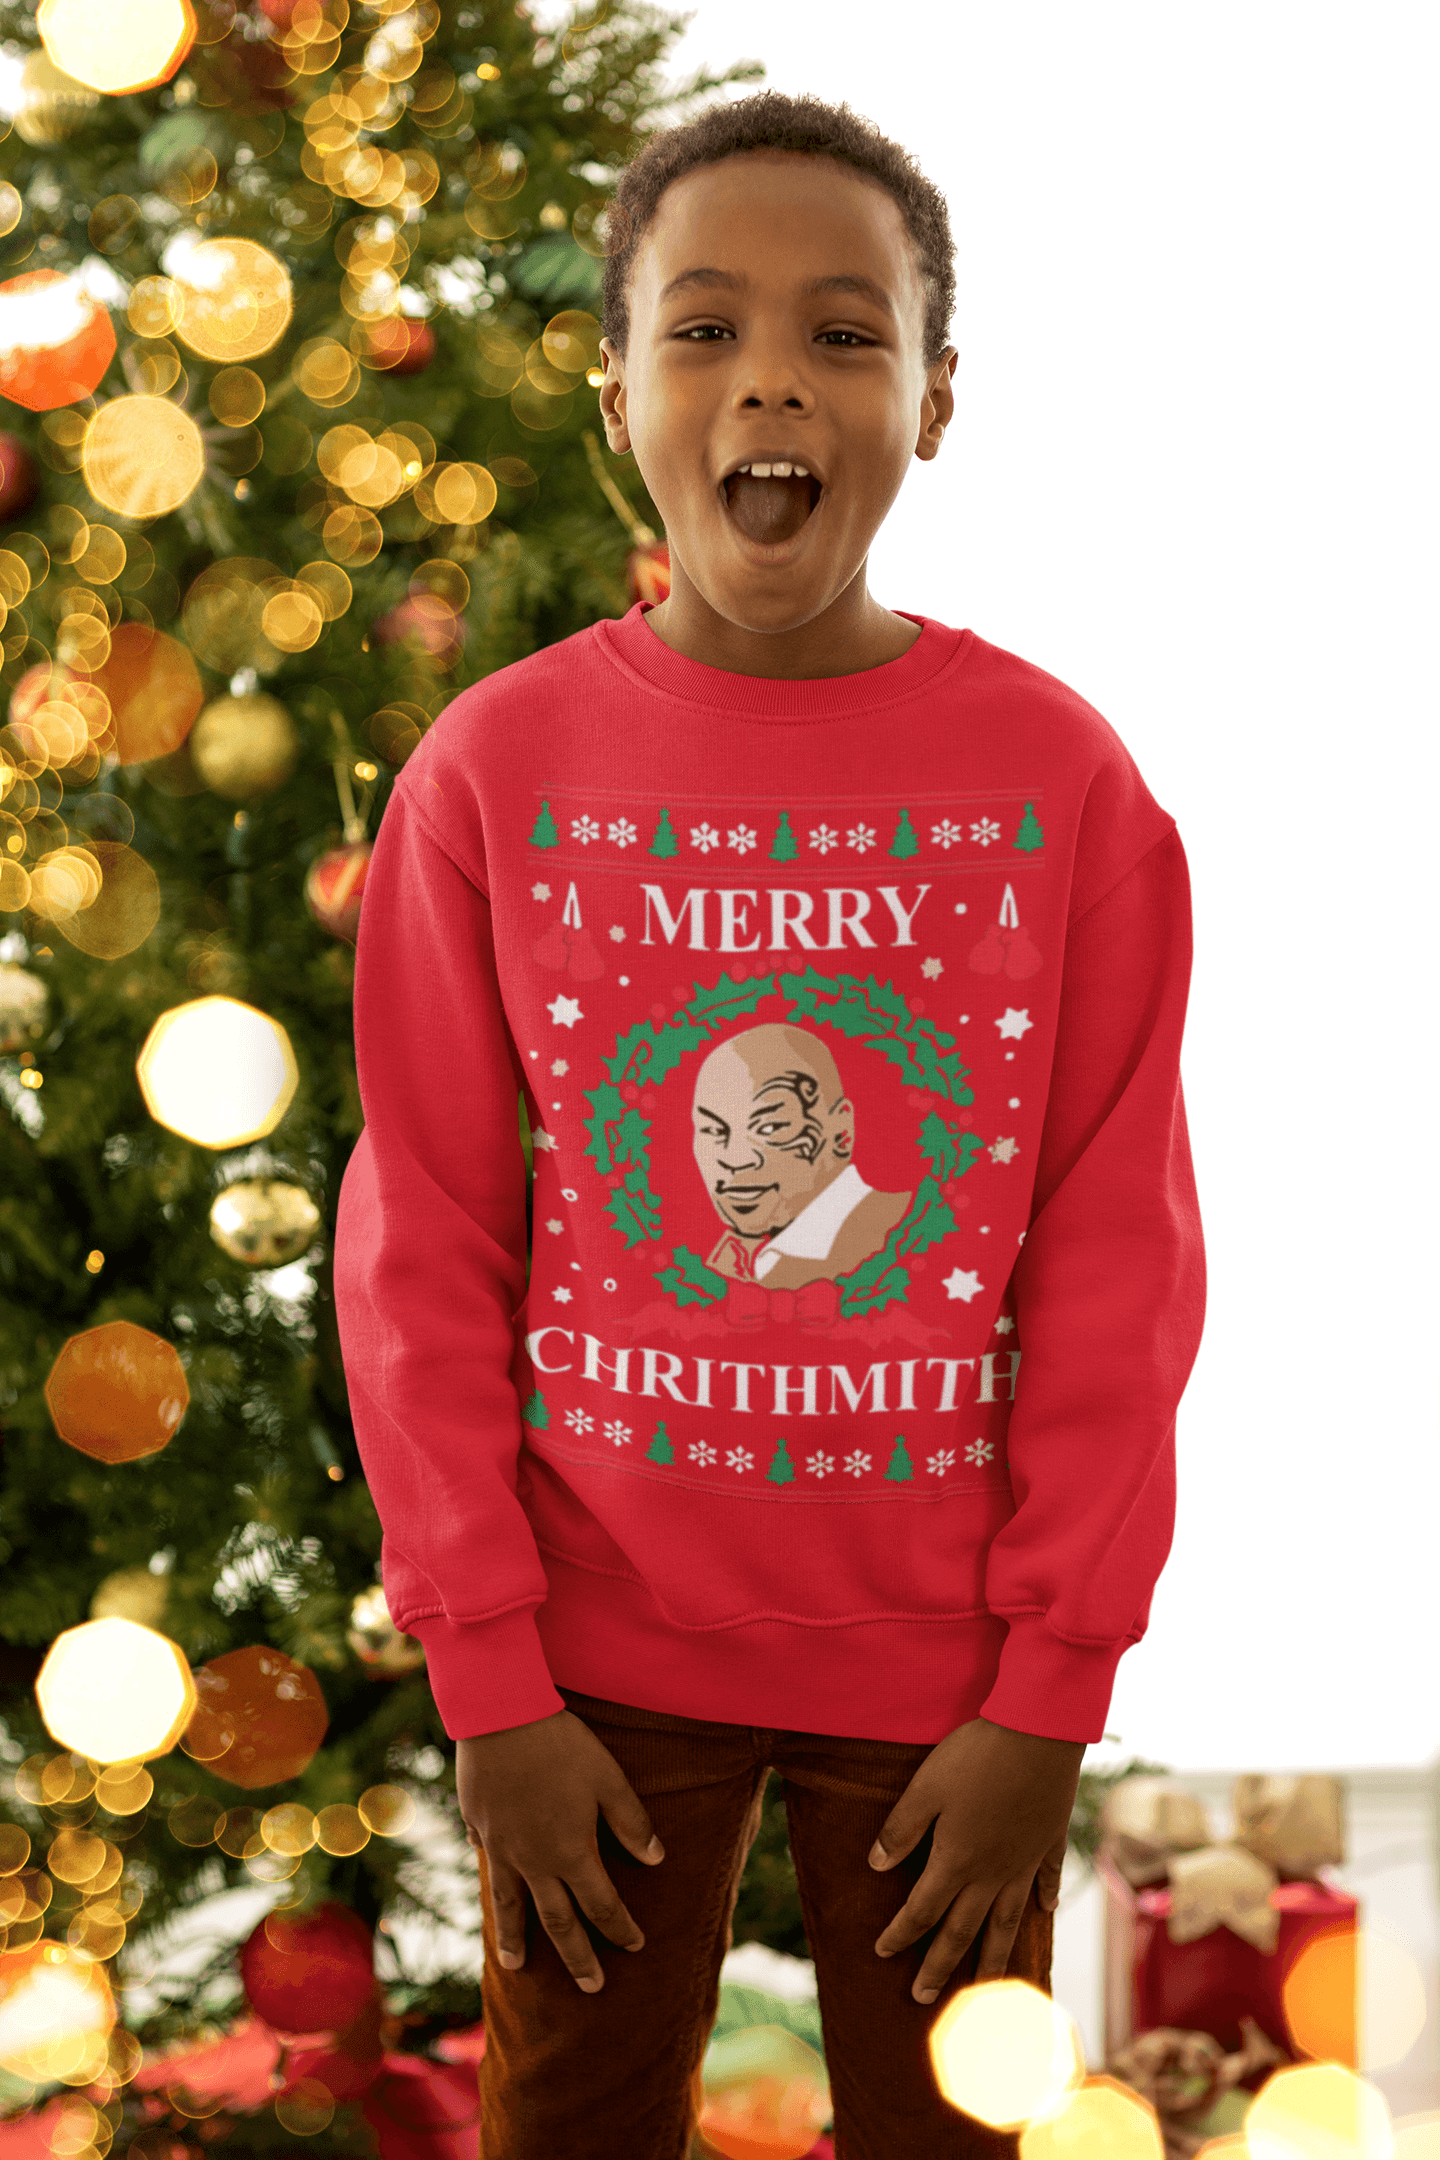 Merry Chrithmith Mike Tyson Unisex Ugly Christmas Sweater